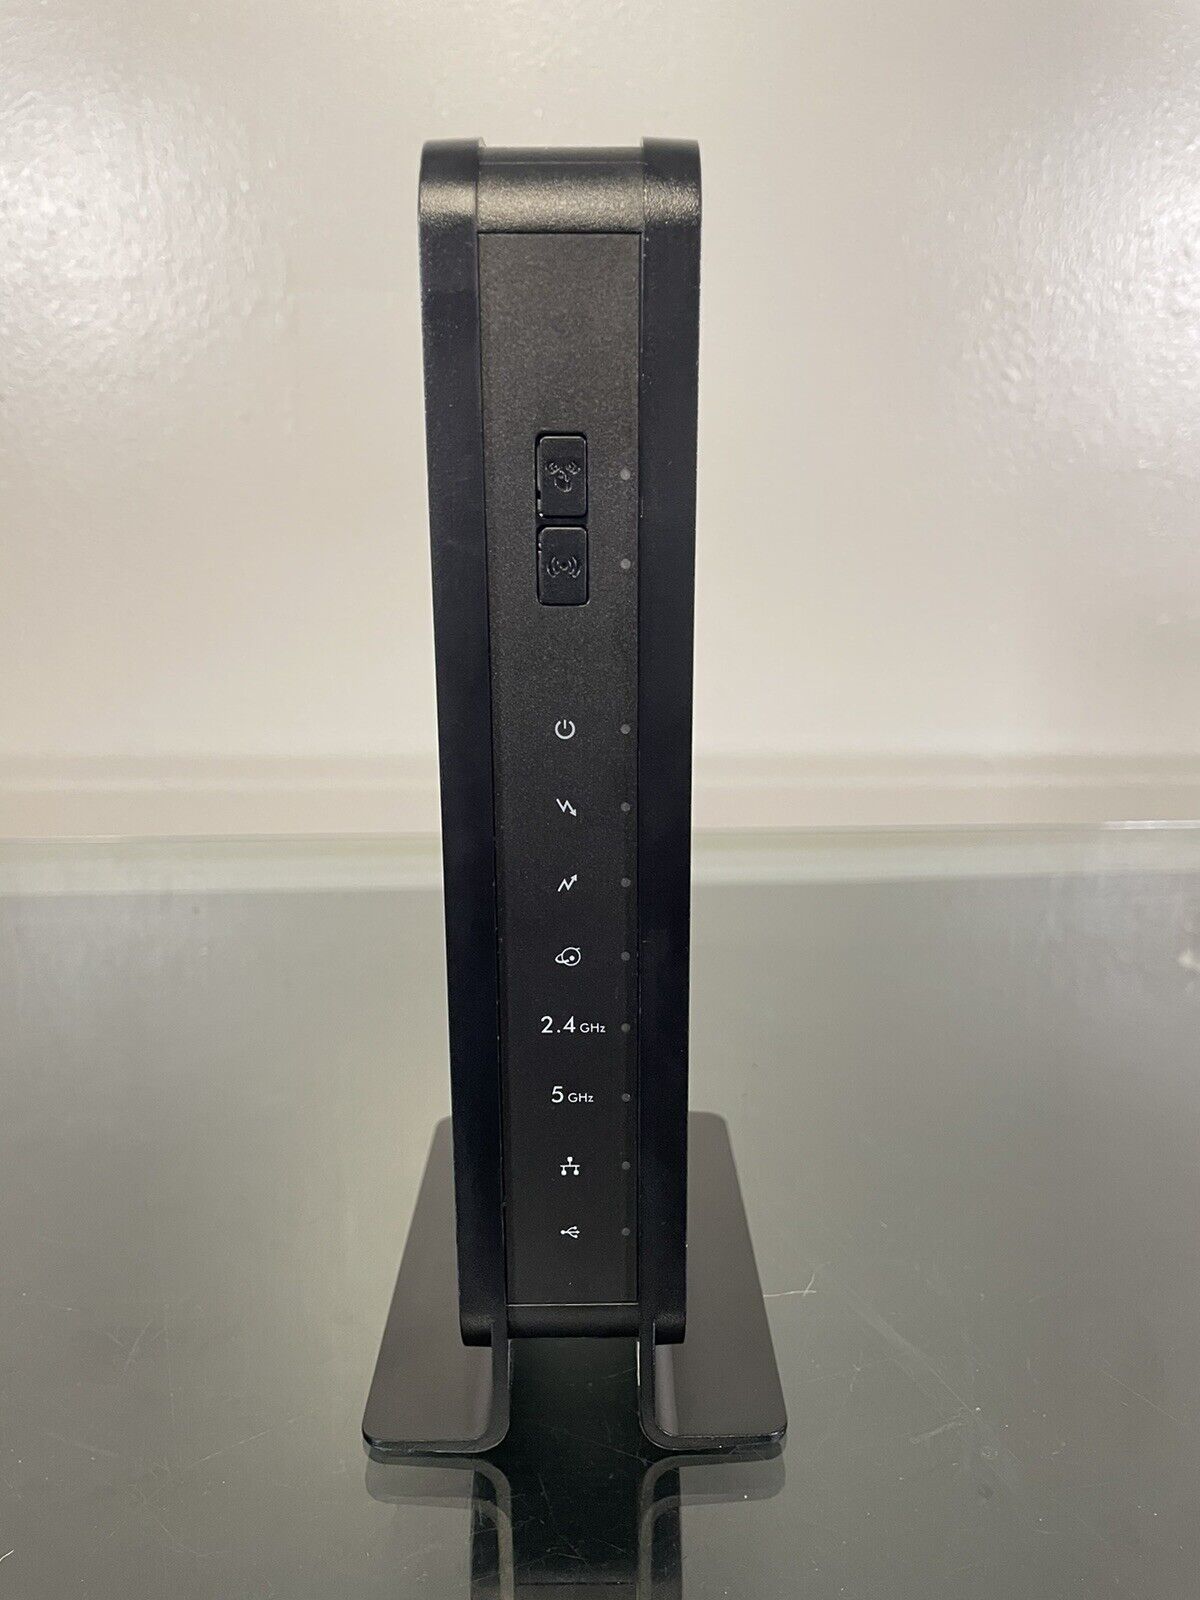 Power Tested Netgear C3700 WiFi Cable Modem Router B06